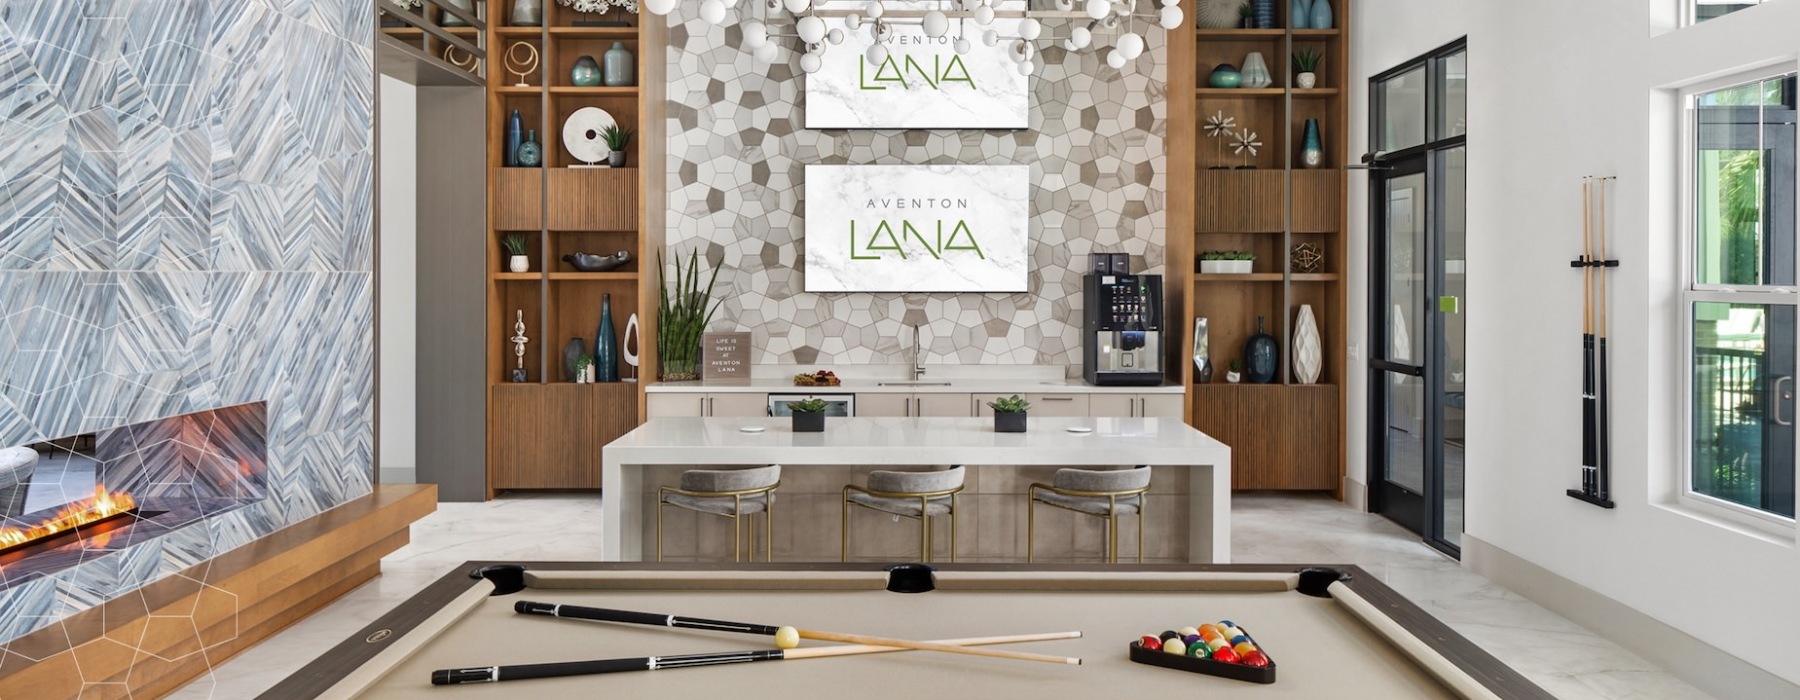 Aventon Lana's community game room with billiards table and chandelier